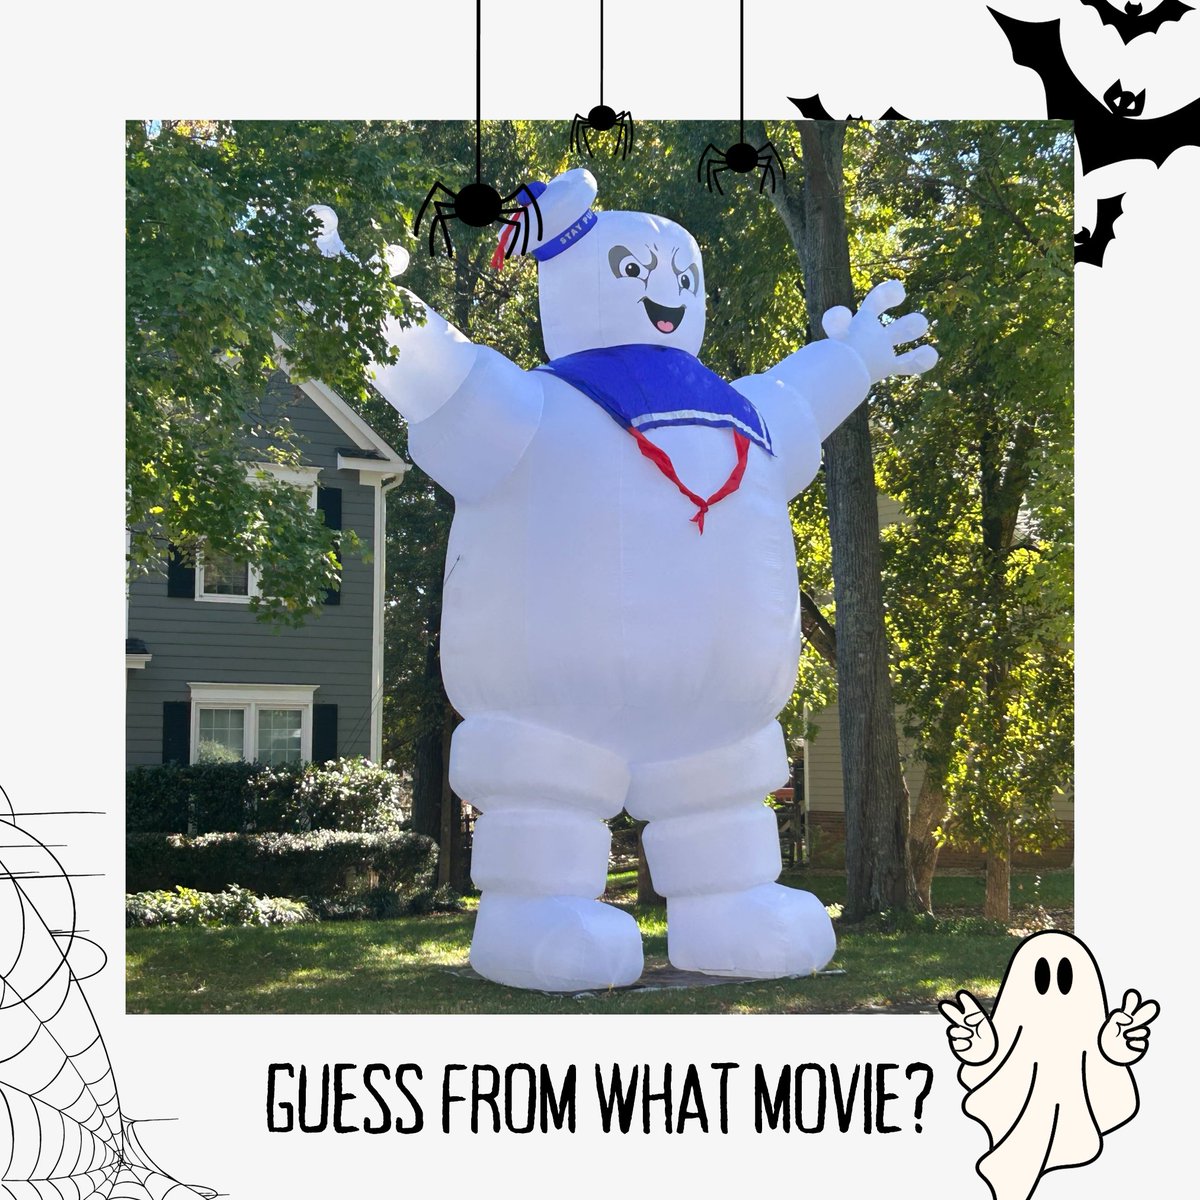 🎃👻 Can you guess which classic Halloween movie this character is from? Comment if you know the name! 🎬🍂 #HalloweenTrivia #MovieQuiz